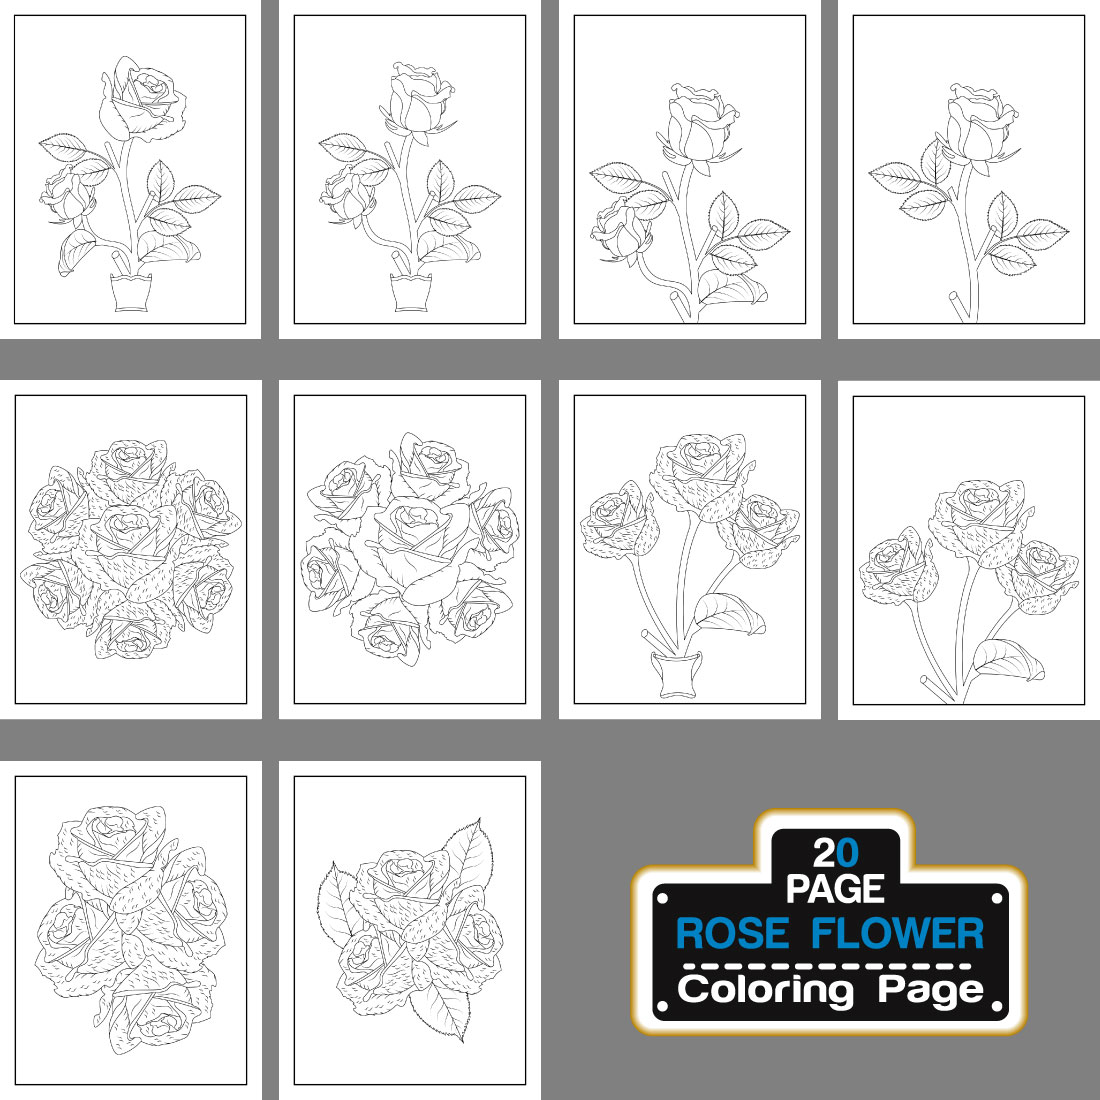 Rose Flower Coloring Page And Book Hand Drawn Line Art illustration preview image.